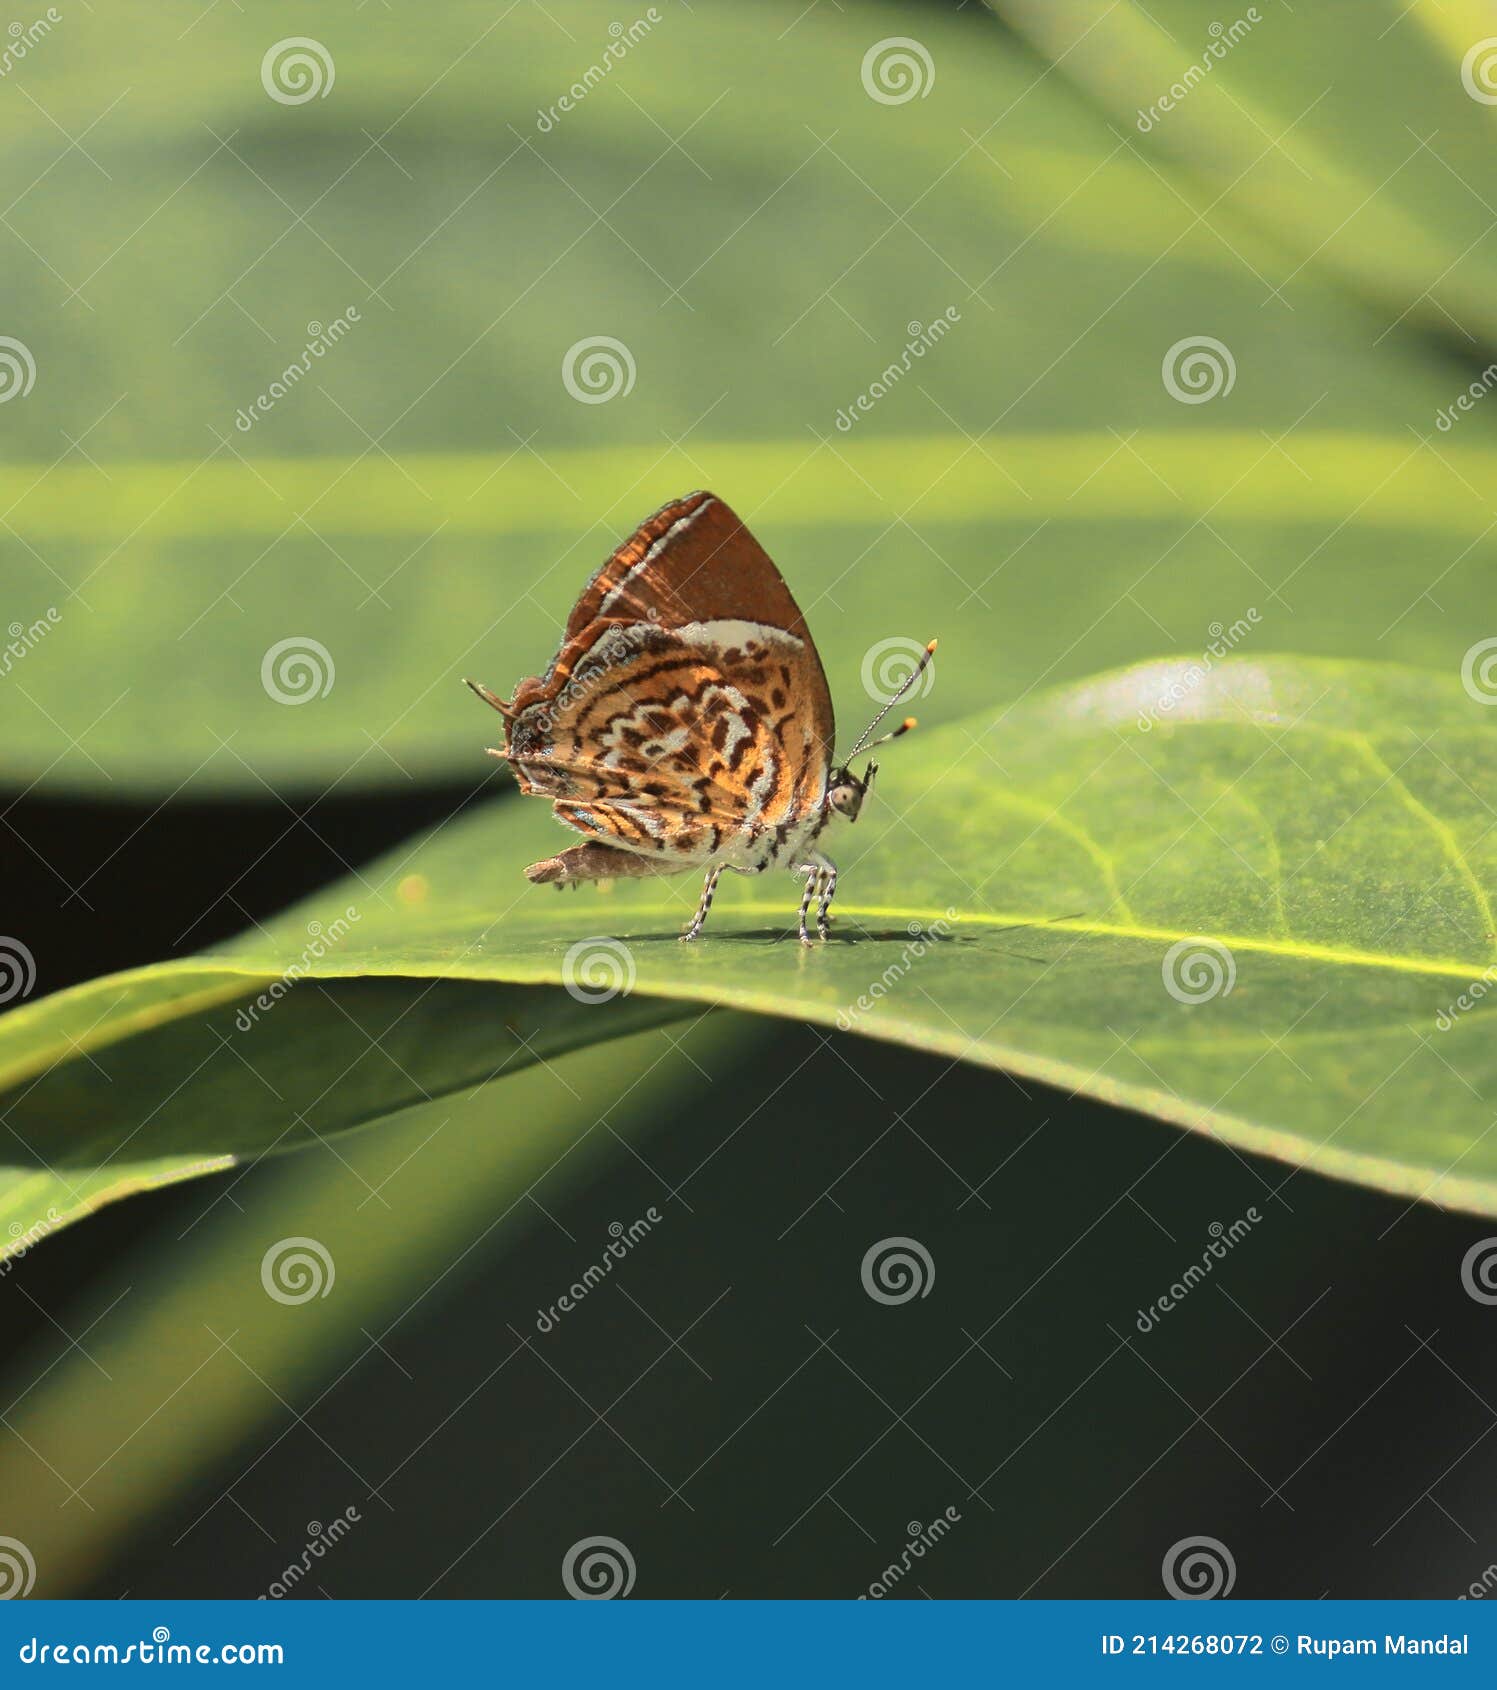 monkey puzzle butterfly is sitting on a green leaf in summertime